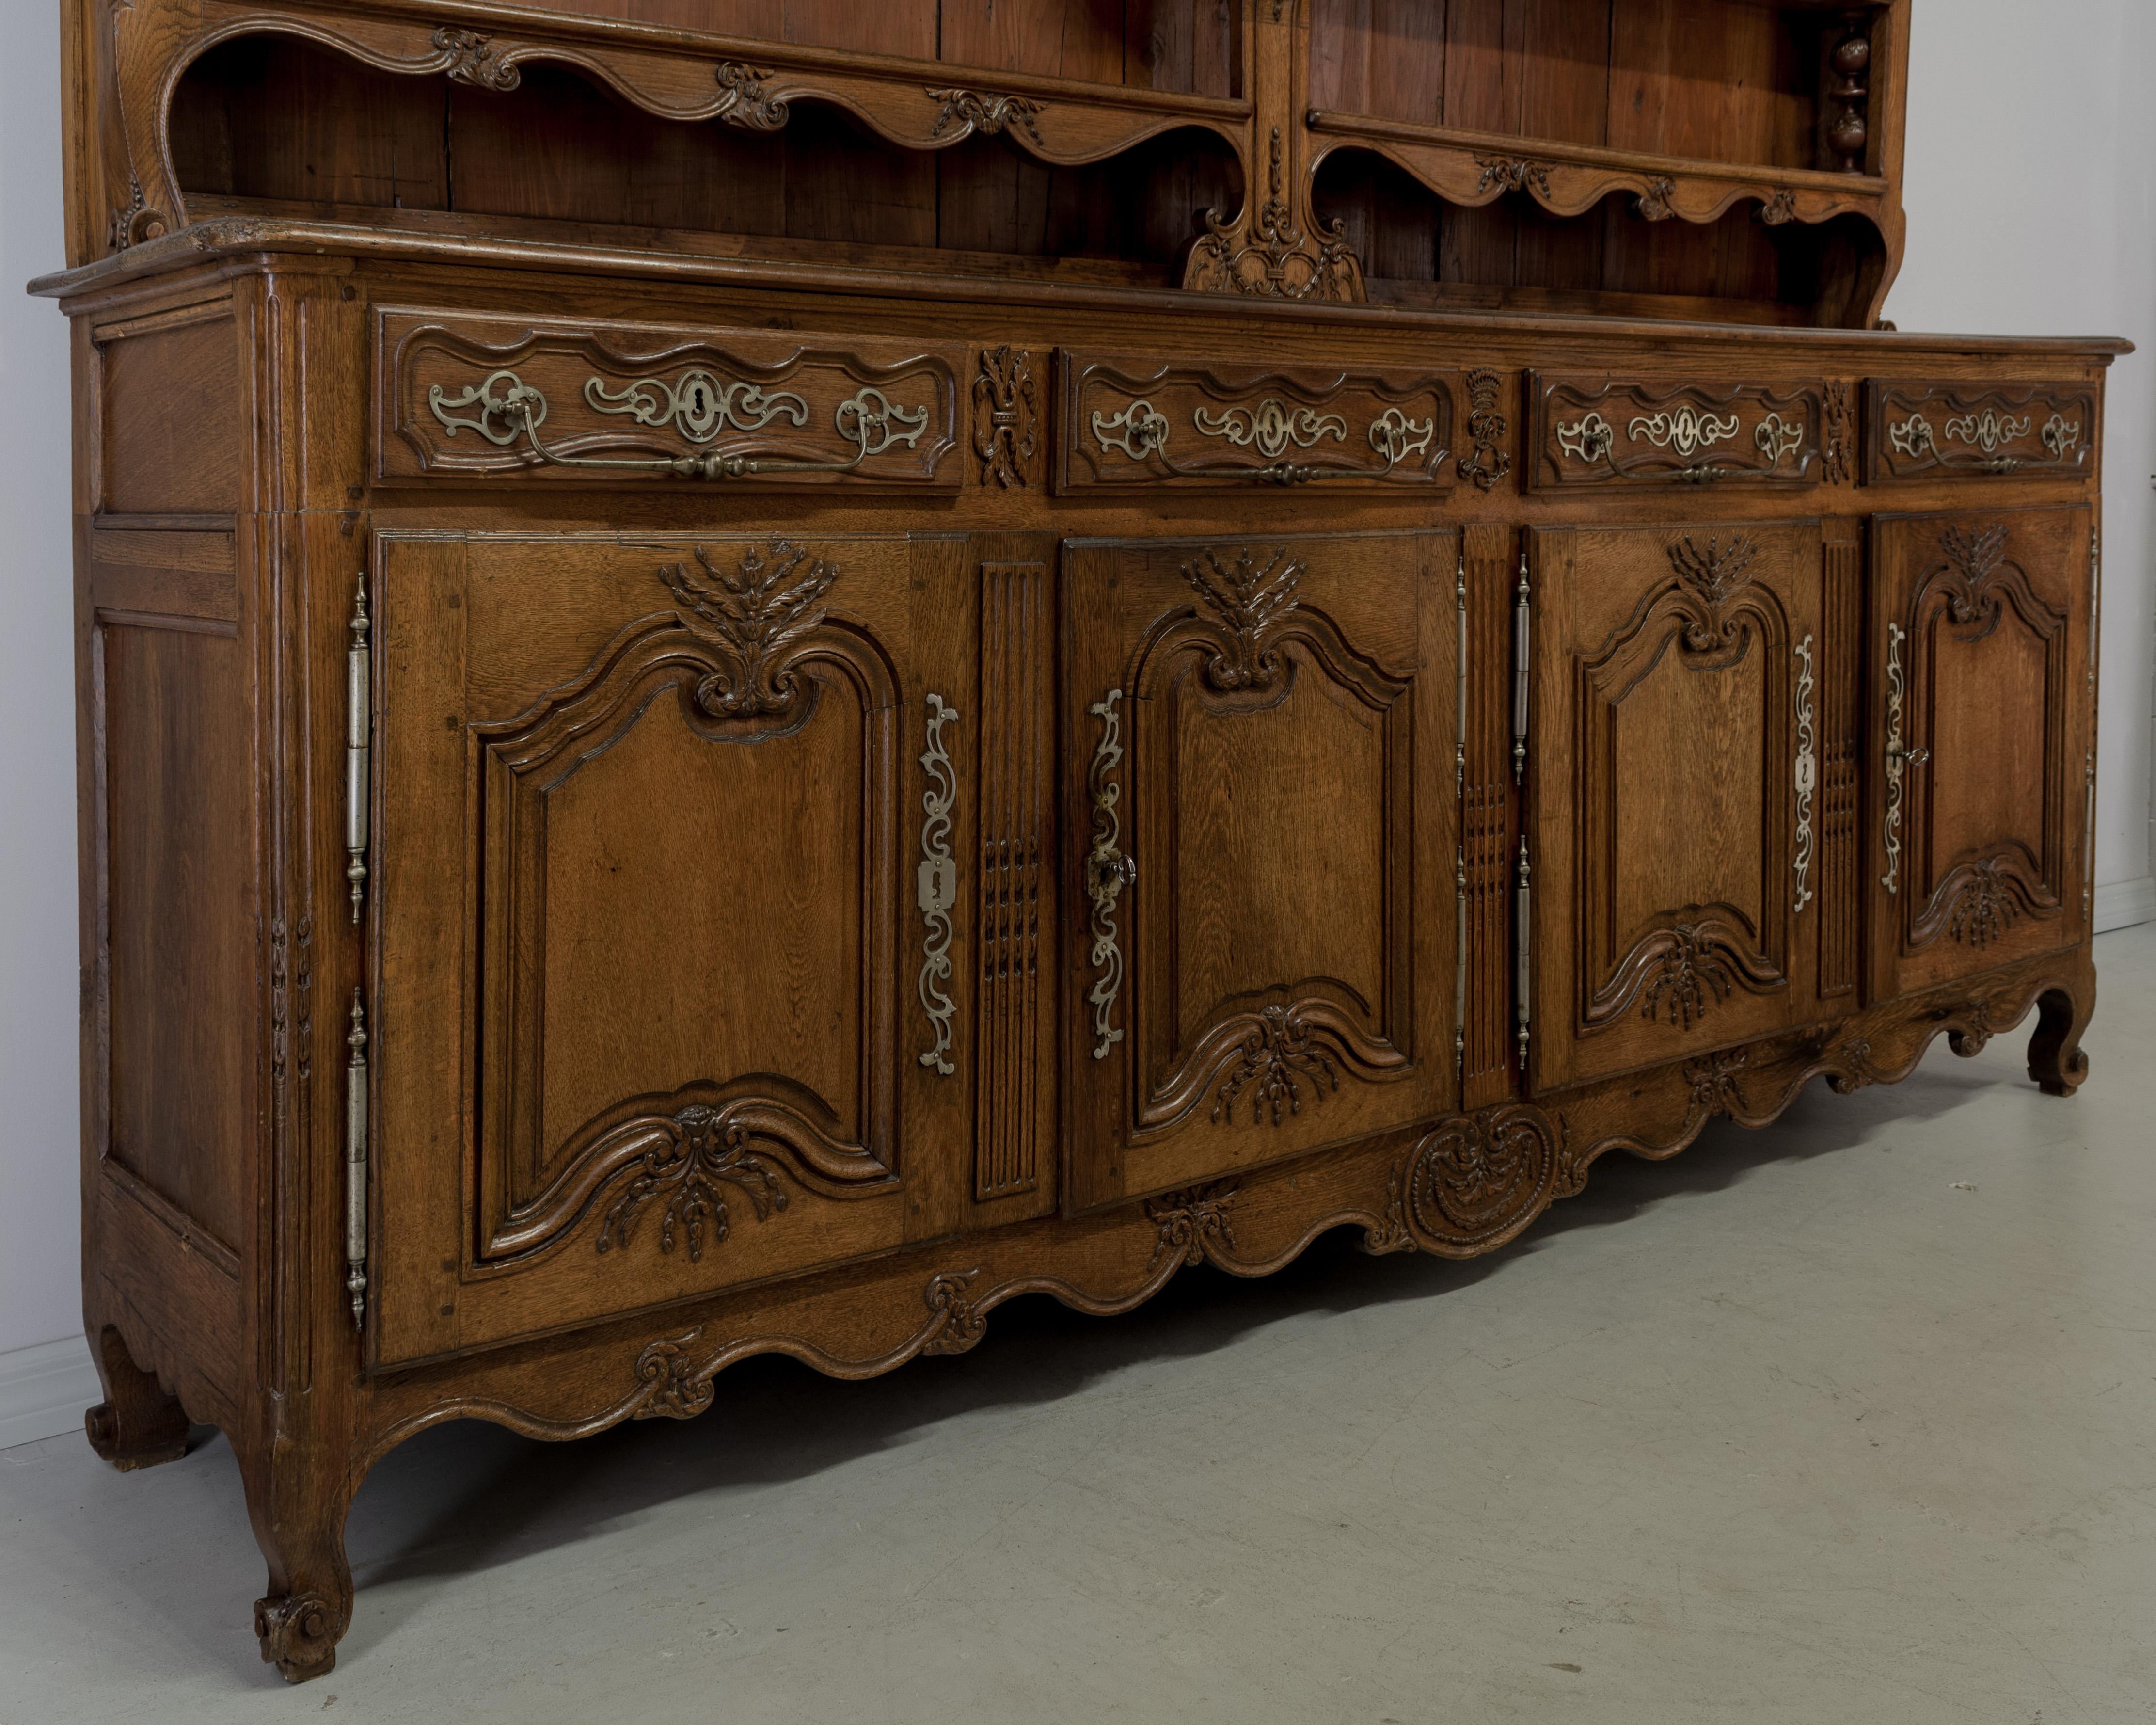 A grand 18th century Louis XV Country French buffet vaisellier from the Alsace Province made of solid oak. Exceptional quality with fine hand carvings throughout. Buffet has four dovetailed drawers with large pulls and four doors opening to one